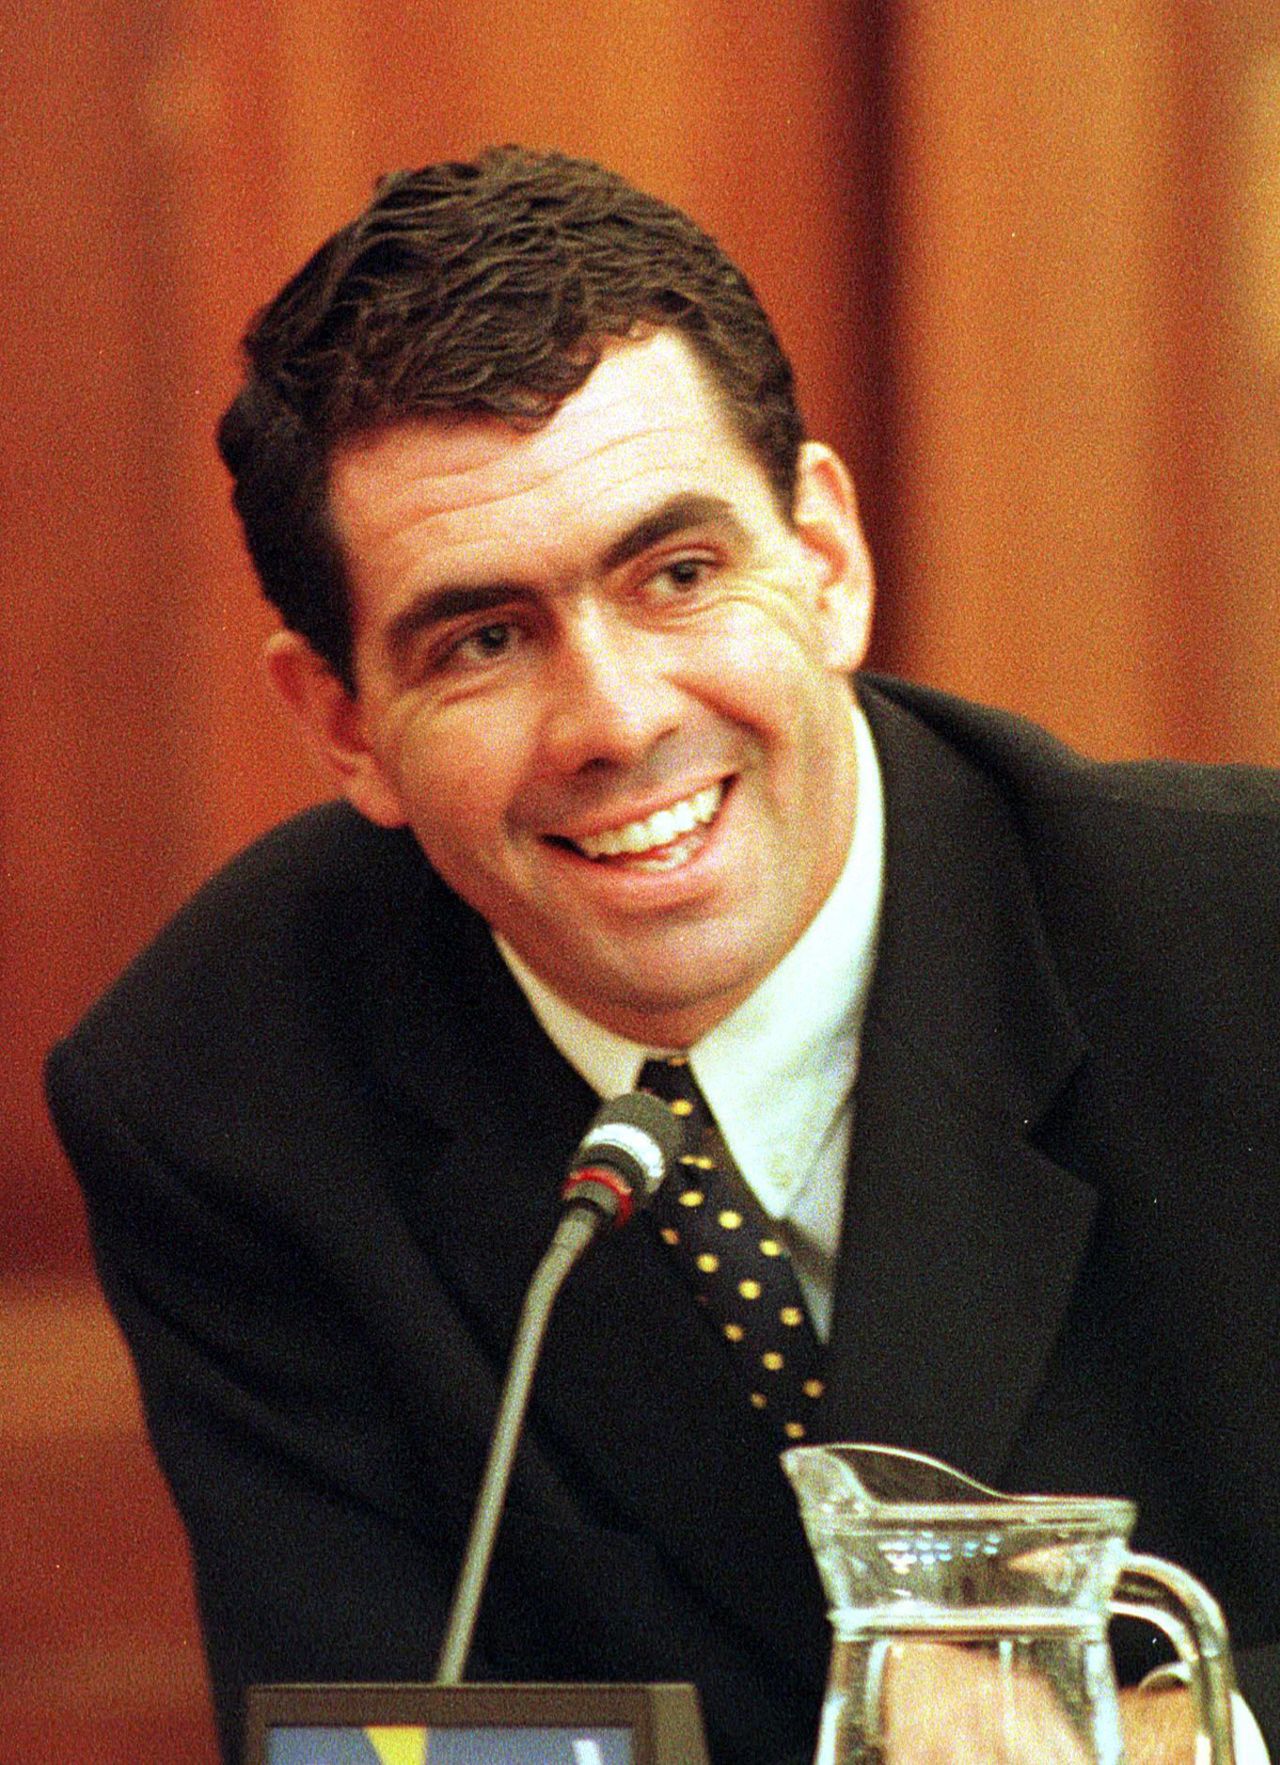 Sacked South African cricket captain Hansie Cronje smiles during his cross-examination at the King Commission of Inquiry into allegations of cricket match-fixing in Cape Town 23 June 2000. Hansie Cronje told the third day of cross-examination here that other players could be involved in match-fixing.